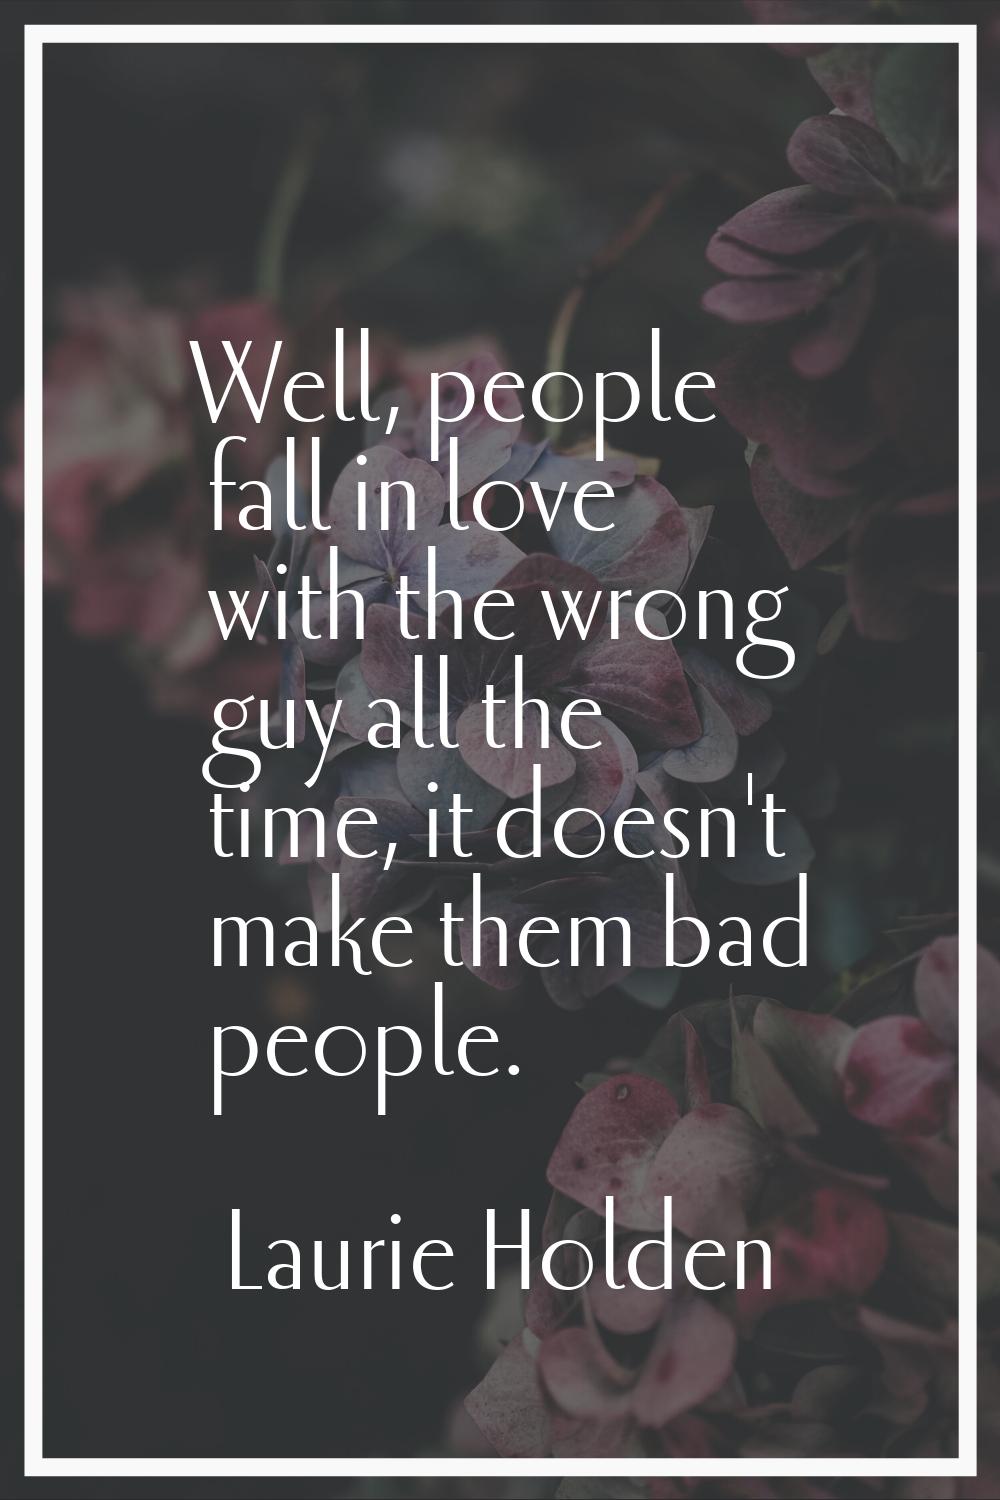 Well, people fall in love with the wrong guy all the time, it doesn't make them bad people.